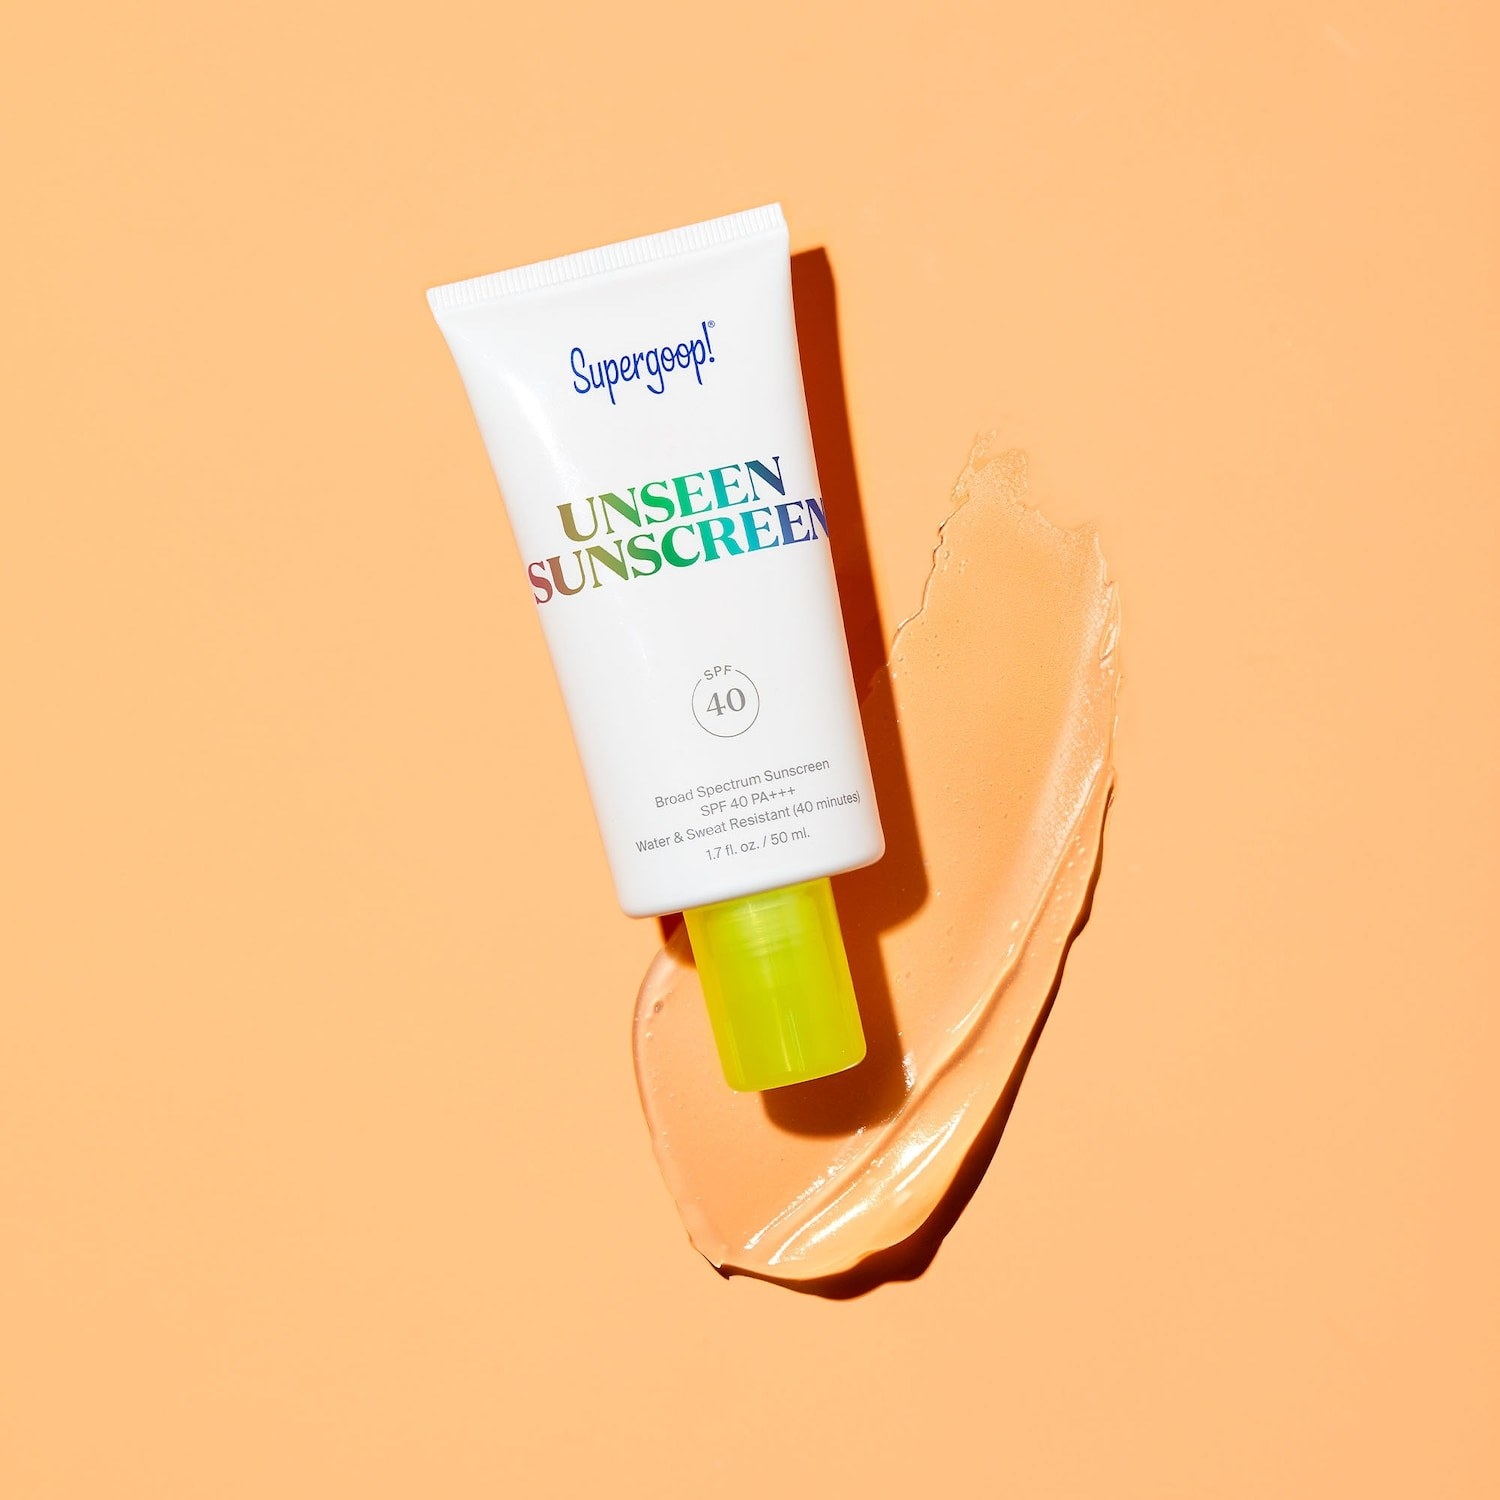 The tube of sunscreen sitting on a glob of it